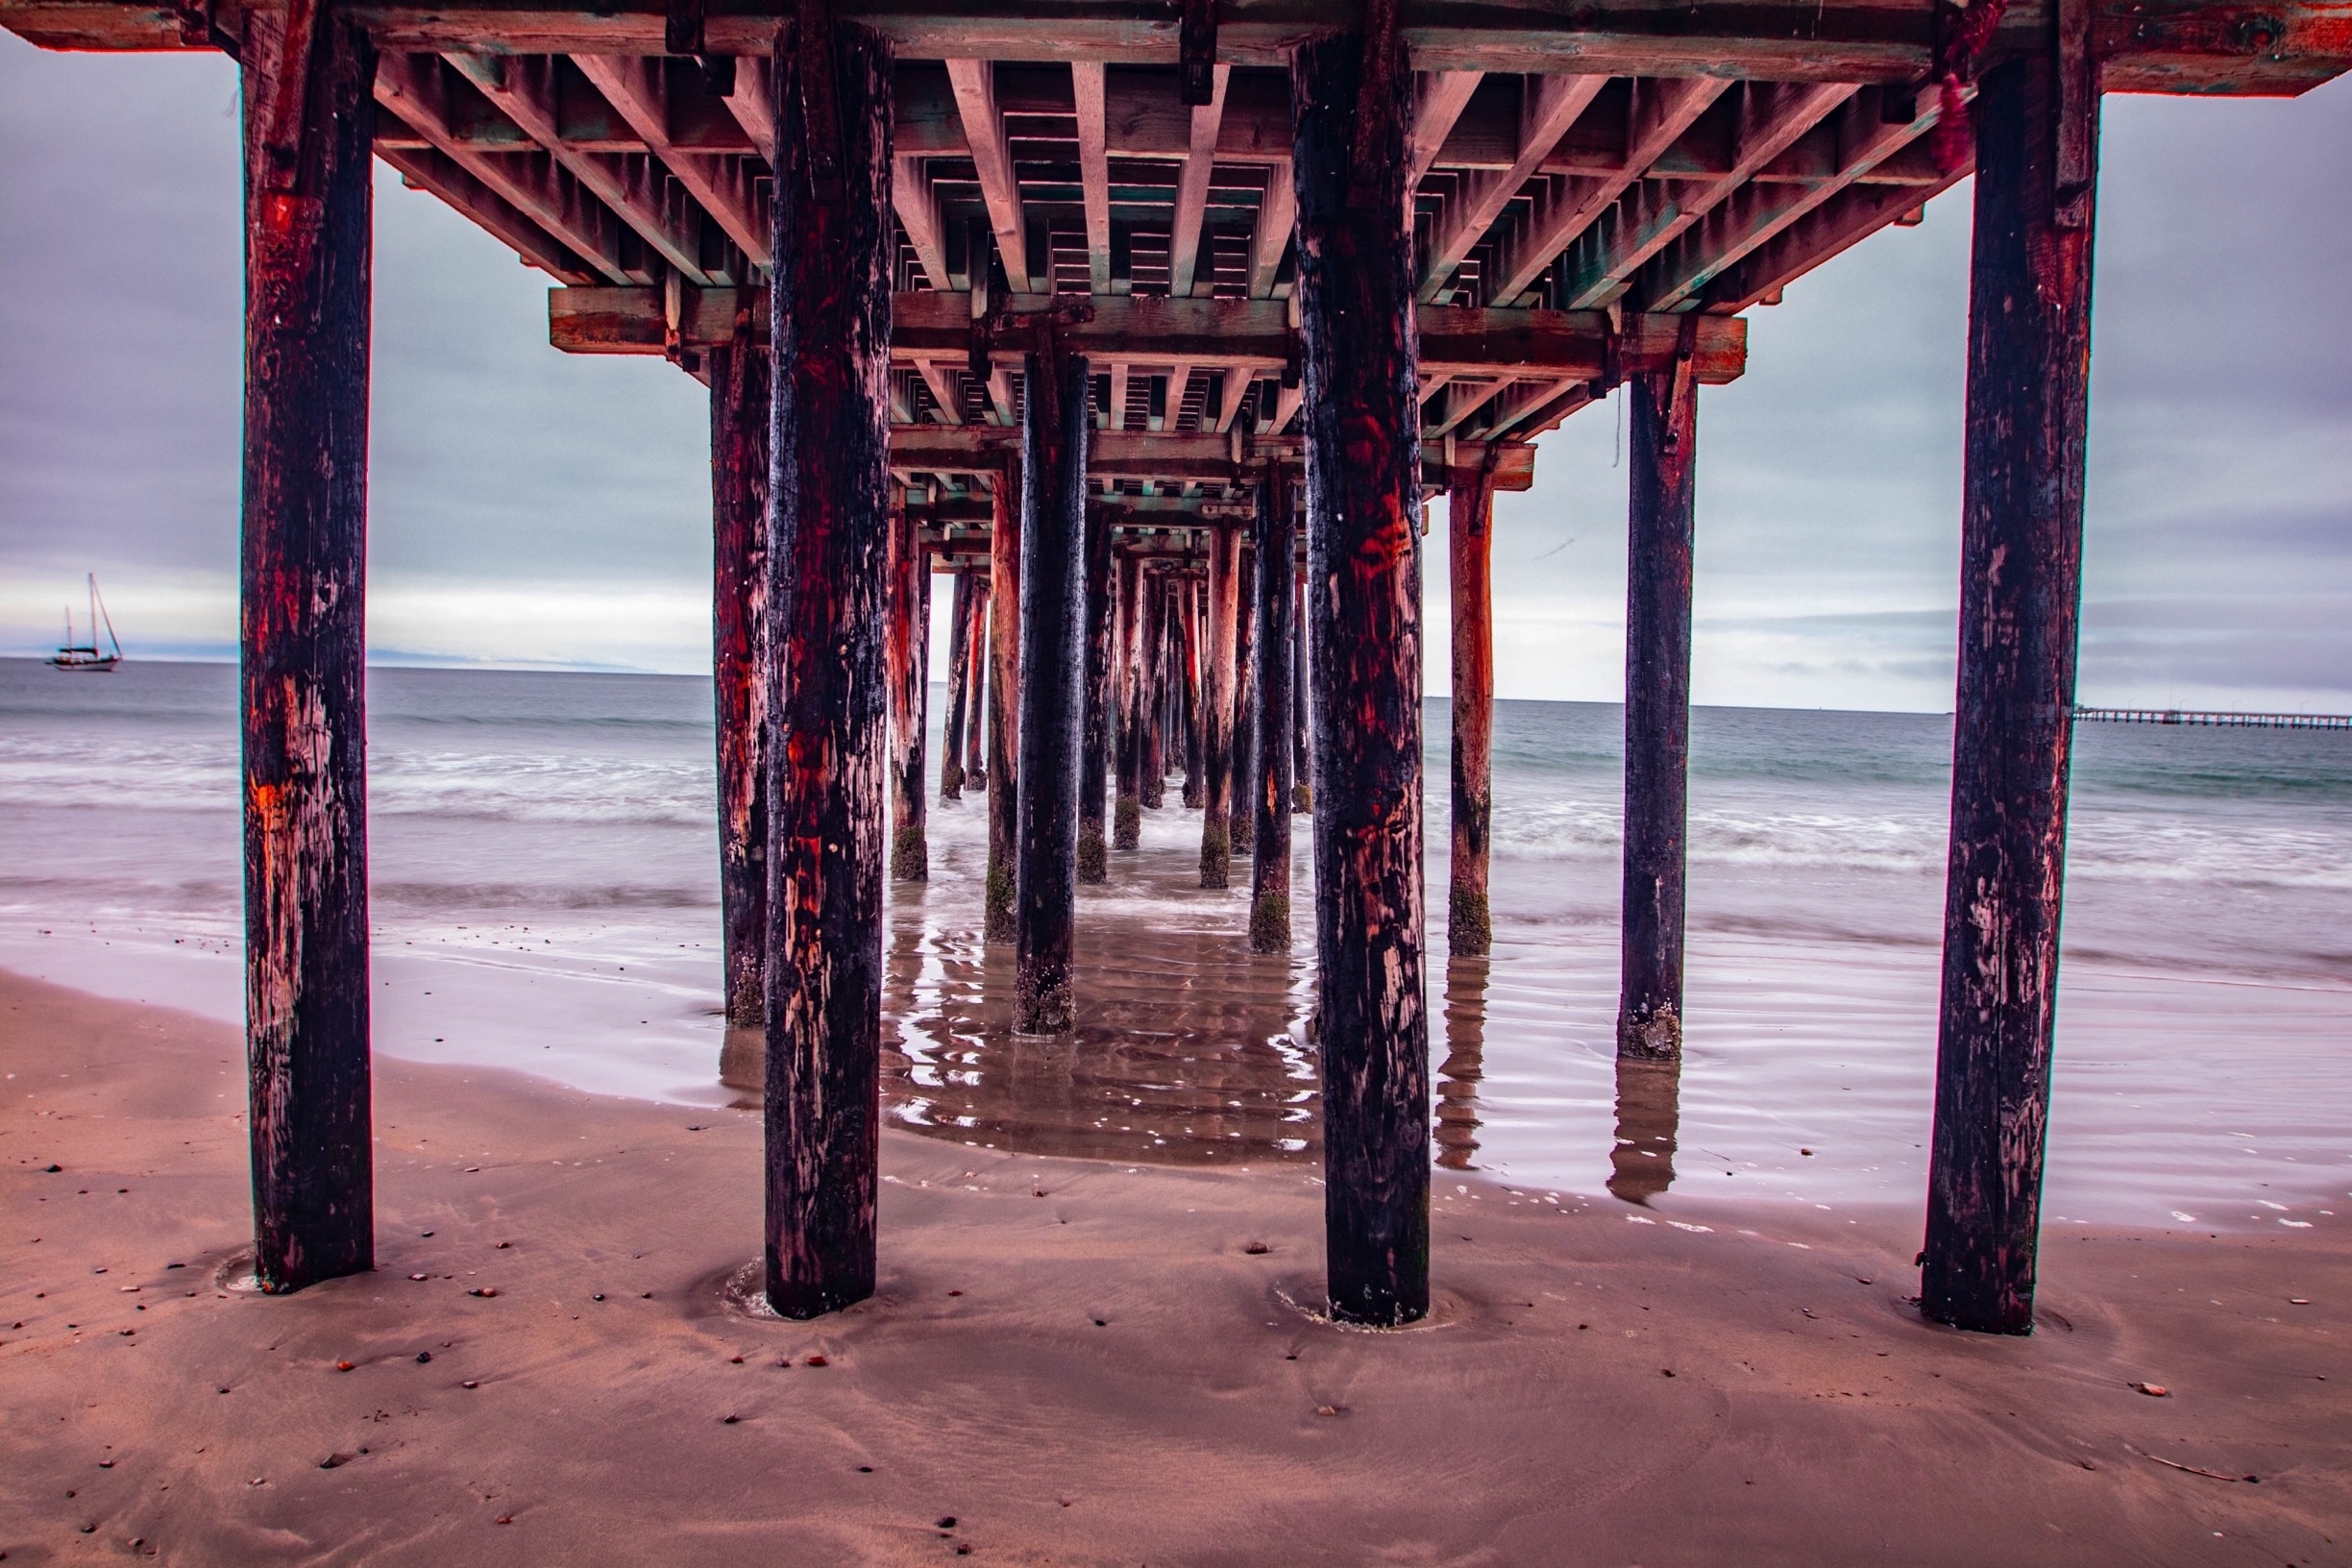 Mornings are pretty foggy here, but I was able to grab this photo under the pier on the beach. The pier helped cut the light so I could get a pretty good exposure. 